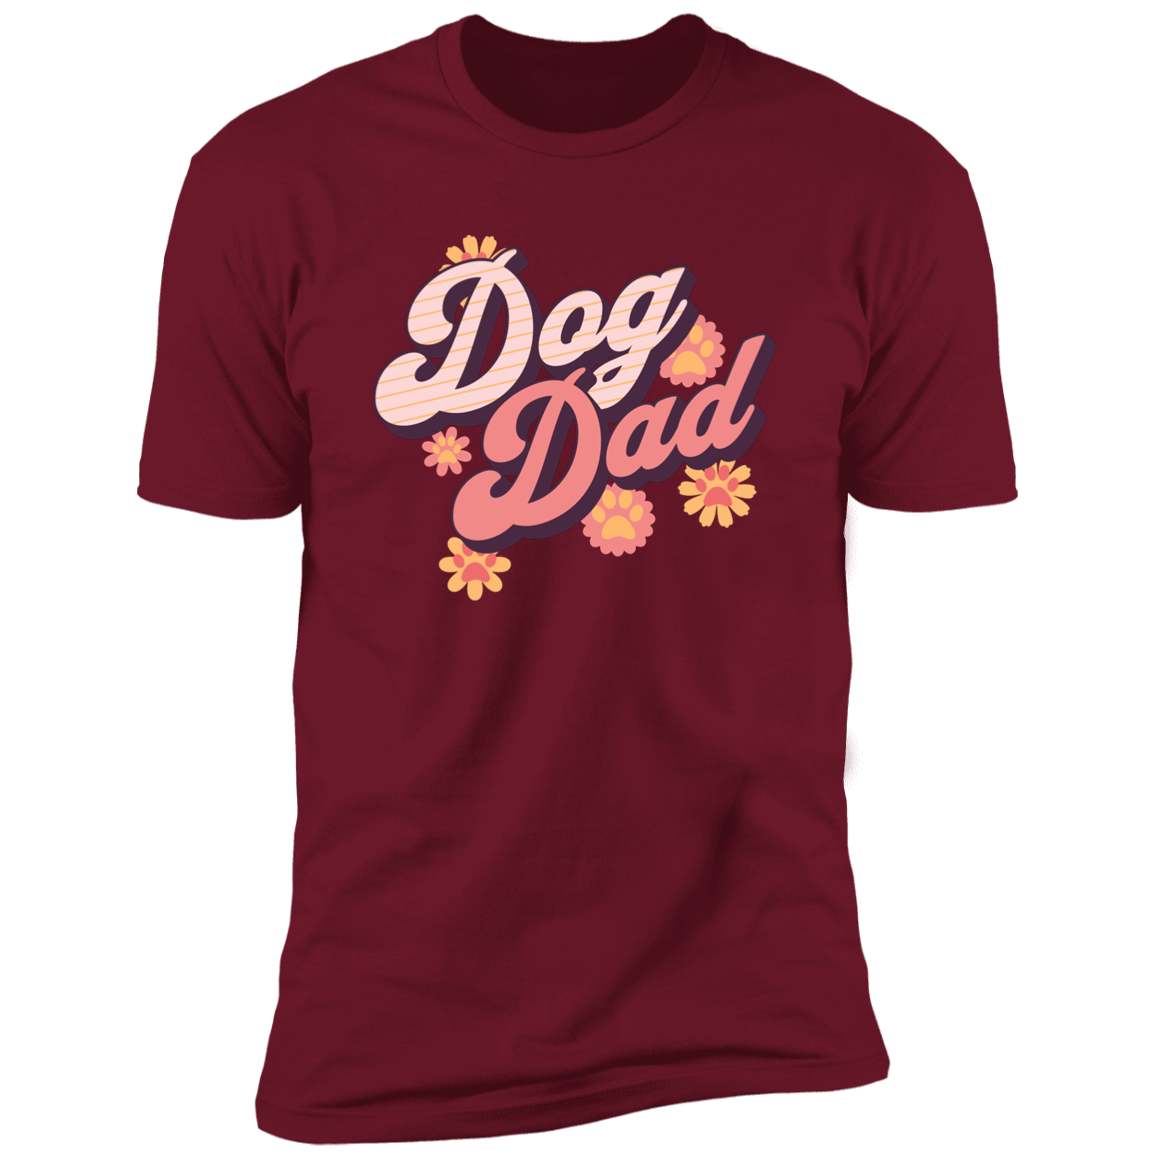 Retro Dog Dad t-shirt, Dog dad shirt, Dog T-shirt for humans, in cardinal red